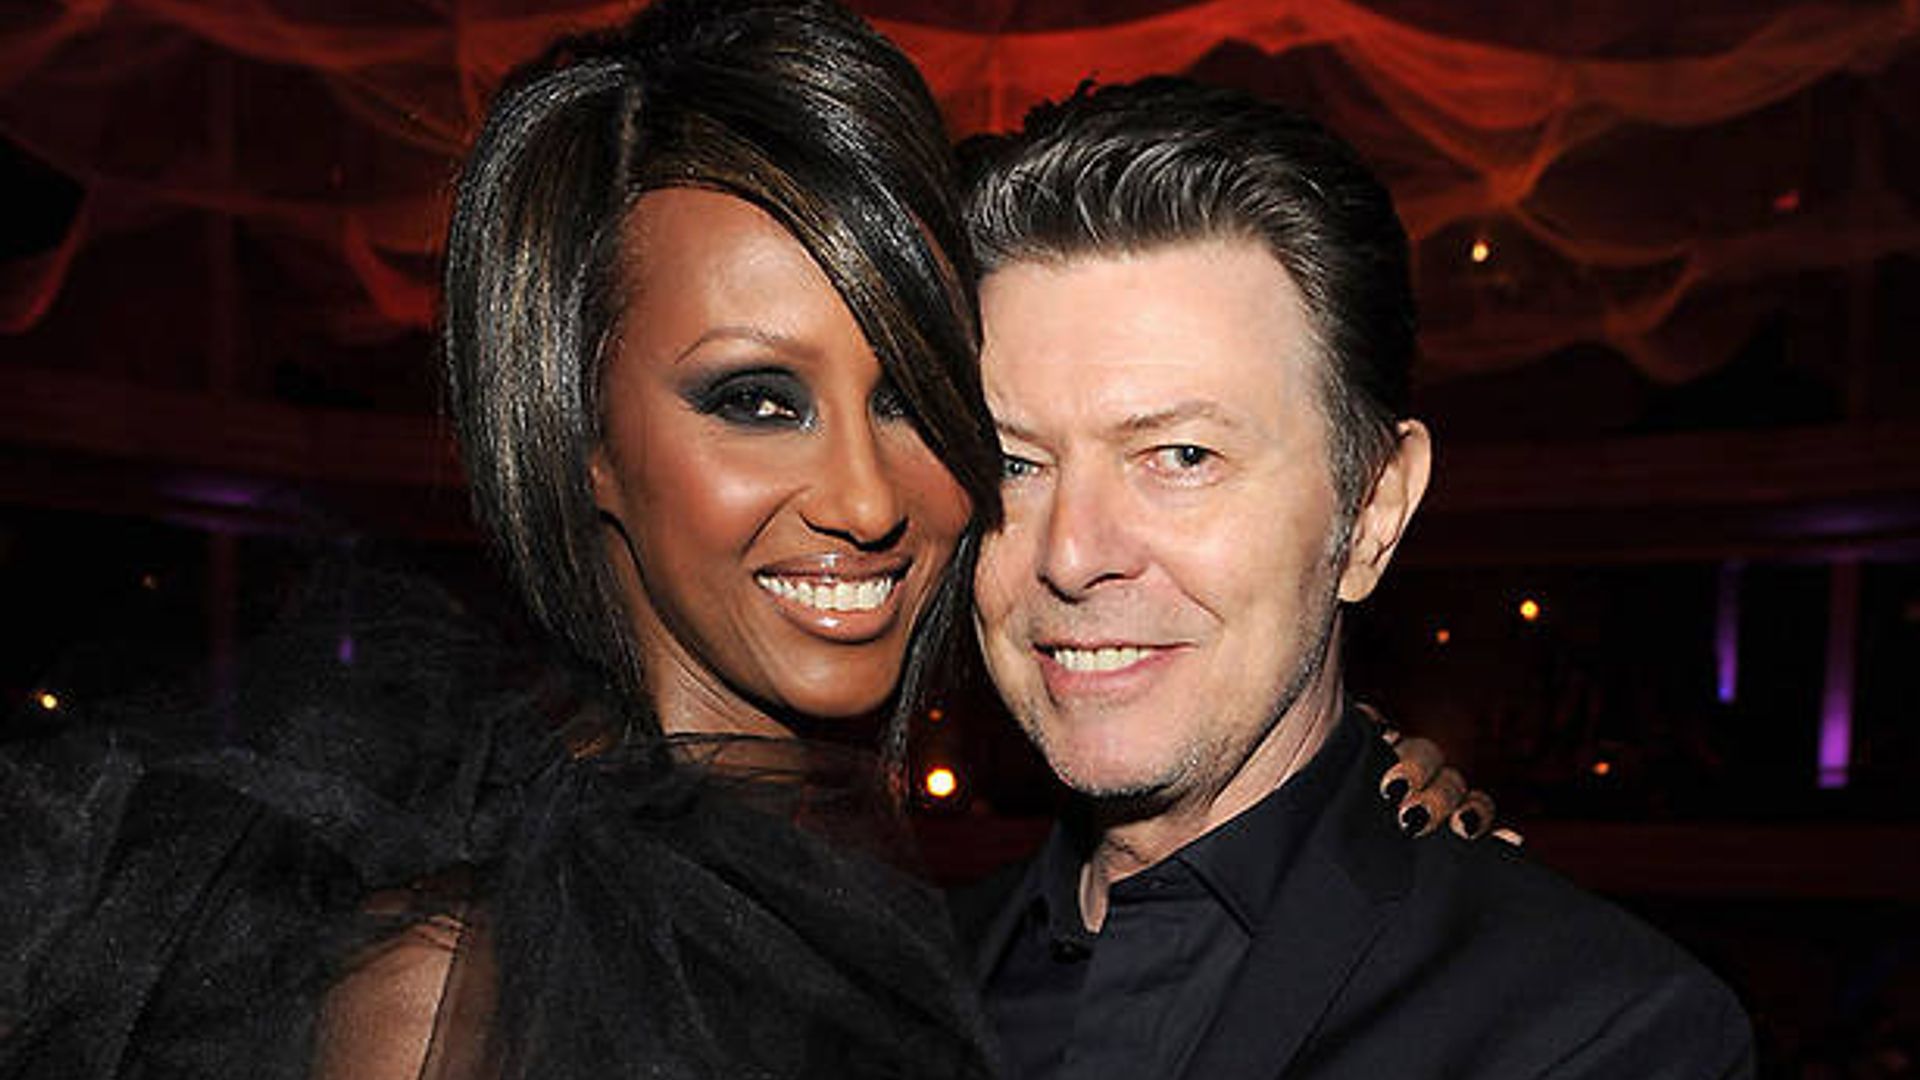 Iman pays tribute to husband David Bowie on their wedding anniversary